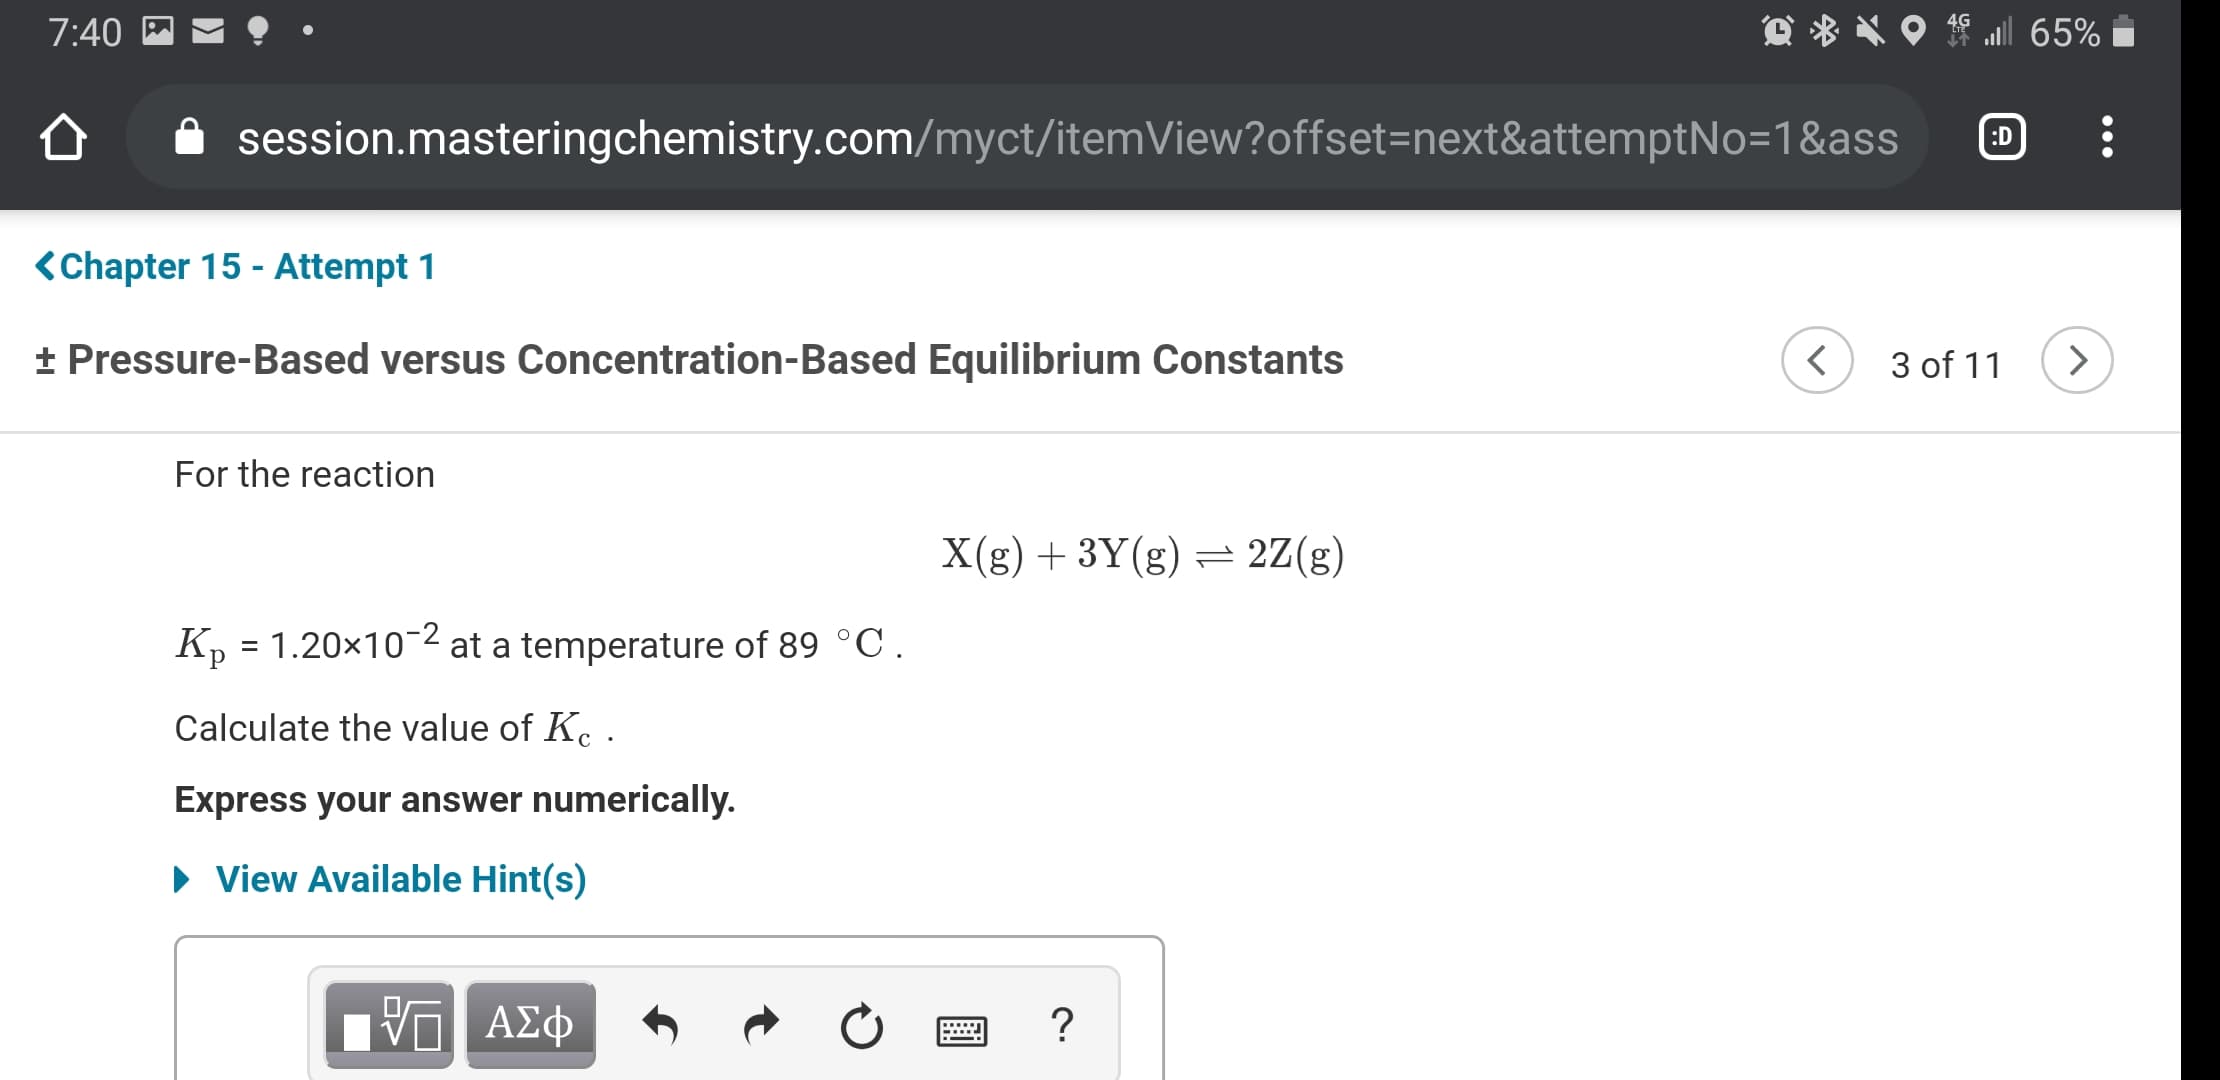 7:40
session.masteringchemistry.com/myct/itemView?offset=next&attemptNo=1&ass
:D
<Chapter 15 - Attempt 1
+ Pressure-Based versus Concentration-Based Equilibrium Constants
3 of 11
For the reaction
X(g) + 3Y(g) = 2Z(g)
K, = 1.20x10-2 at a temperature of 89 °C.
Calculate the value of K. .
Express your answer numerically.
• View Available Hint(s)
ΑΣφ
